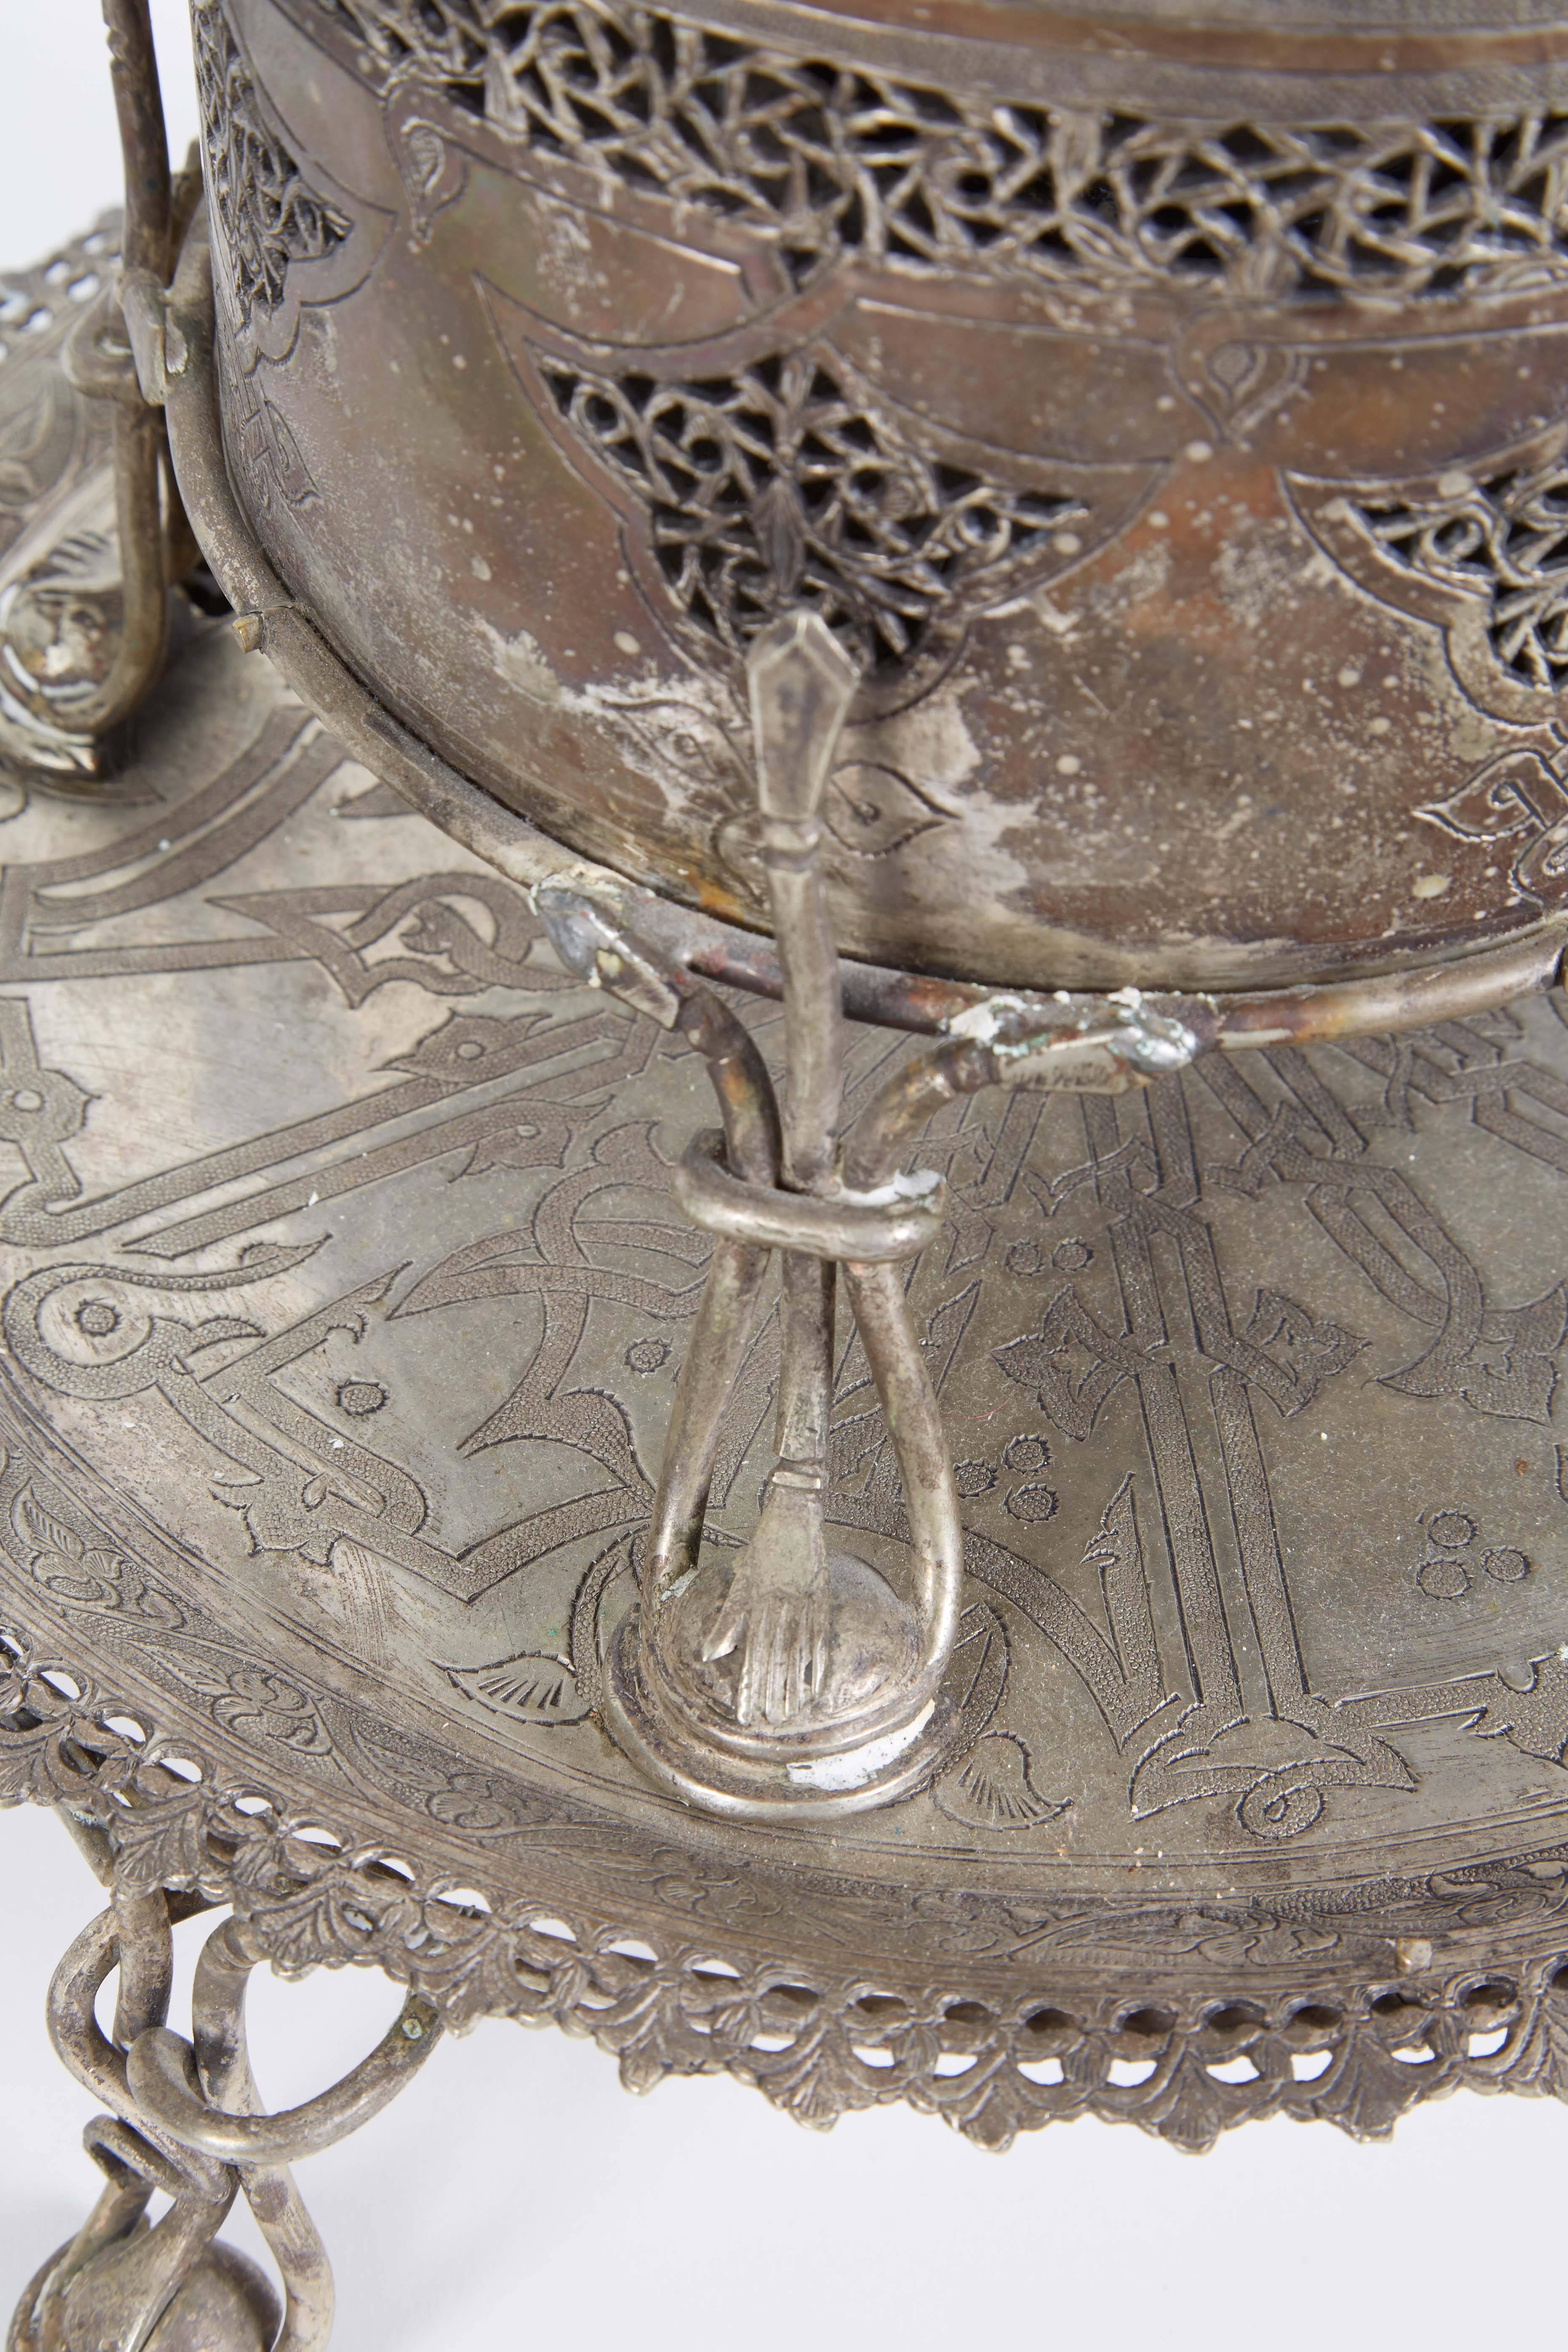 20th Century Pair of Antique Islamic Persian Silver Incense Burners with Arabic Calligraphy